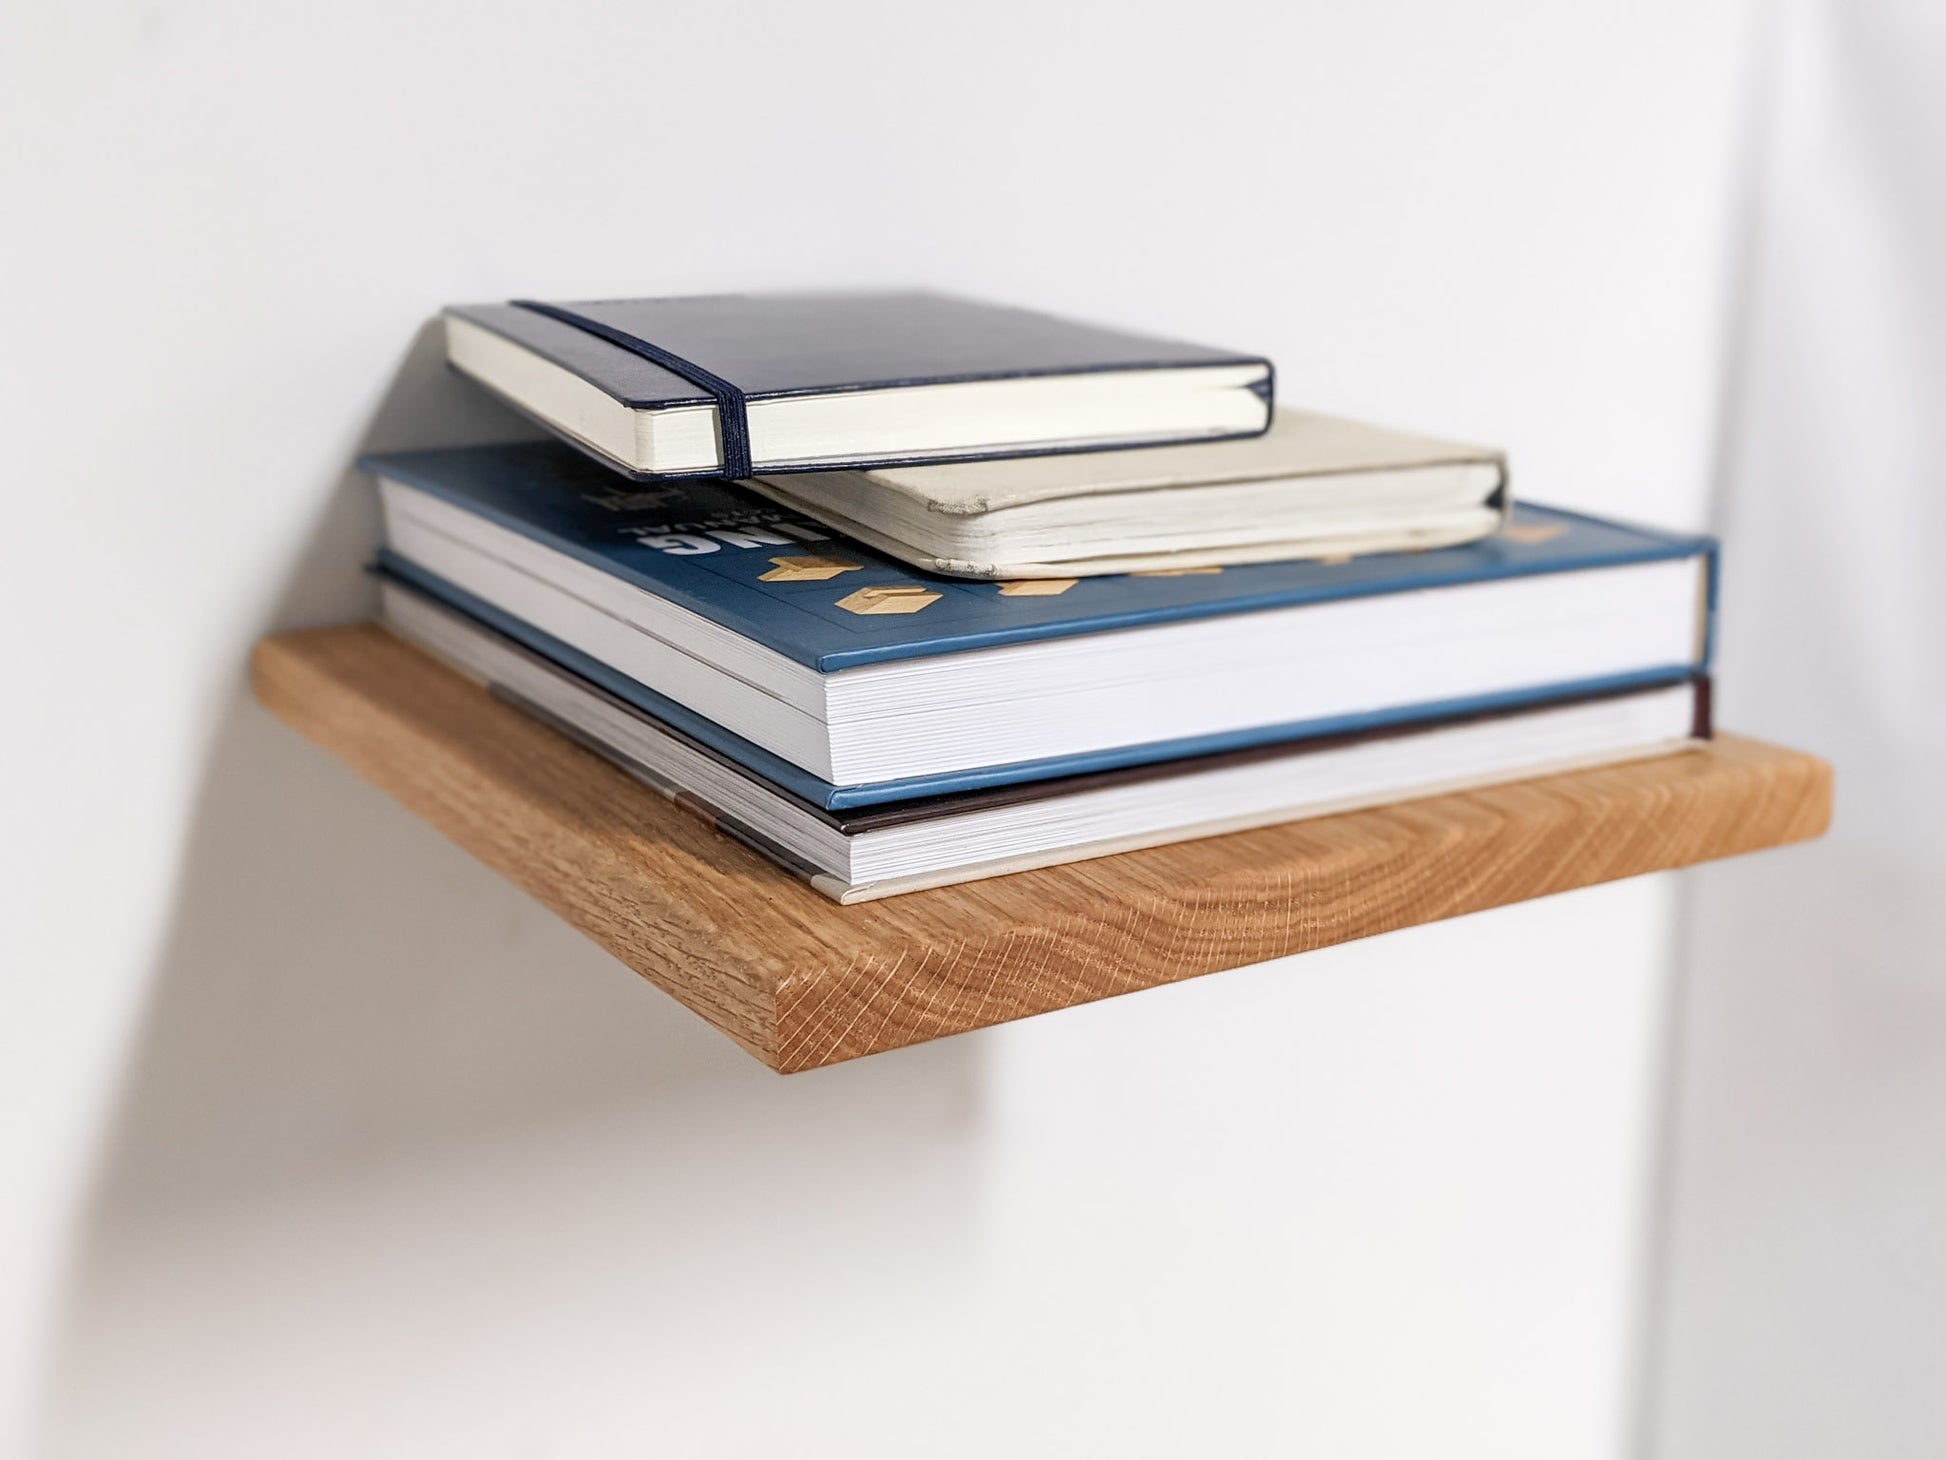 A customized medium oak floating shelf holds a stack of four books in blue and gray shades.